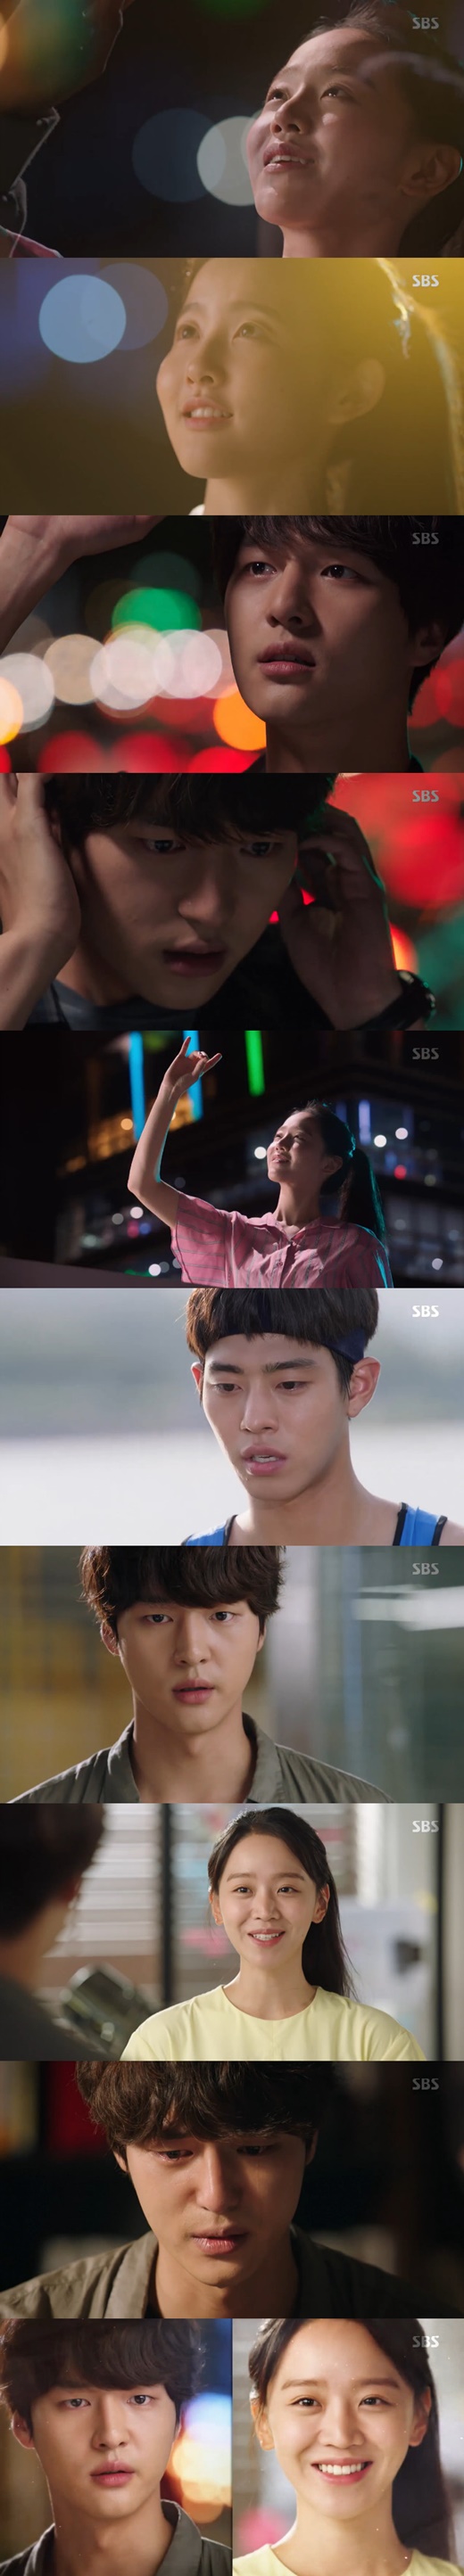 Thirty but seventeen Yang Se-jong, Ahn Hyo-seop started to fall in love with Shin Hye-sunIn the 9th and 10th SBS monthly dramas Thirty but Seventeen (playplayed by Cho Sung-hee), which aired on the 6th, Usari (Shin Hye-sun), Yang Se-jong, and Yu Chan (Ahn Hyo-seop) were shown together.On this day, Gong Woo-jin began to feel strange feelings about Utheri, who misunderstood him when he saw Utheri go into a building with a bar and make up his face.Uthery had gone to do Alba.Utheri felt nervous about the appearance of Gong Woo-jin who came to save himself. He also expressed his mind to Gong Woo-jin, You are a good person.Gong Woo-jin took the Utheri silently, and Utheri thanked him.Gong U-jin saw U-sur-ri and recalled U-sur-ris young image, which he had a crush on in the past.Noh Sumi died in a bus accident, and Gong Woo-jin thinks that Nosumi died because of himself.Utheri then worked with Gong Woo-jin. He recalled the past Utheri.I am afraid that the closer I get to him, the more I will be reminded of that memory, and I am afraid that I will become involved in someones life.I was embarrassed to work with Usseree.Yuchan felt agitated at Uthery, too, and when he stared at him, he was ashamed to see his lips.After that, Yuchan realized that the reason why his heart tickles was because of his right side.